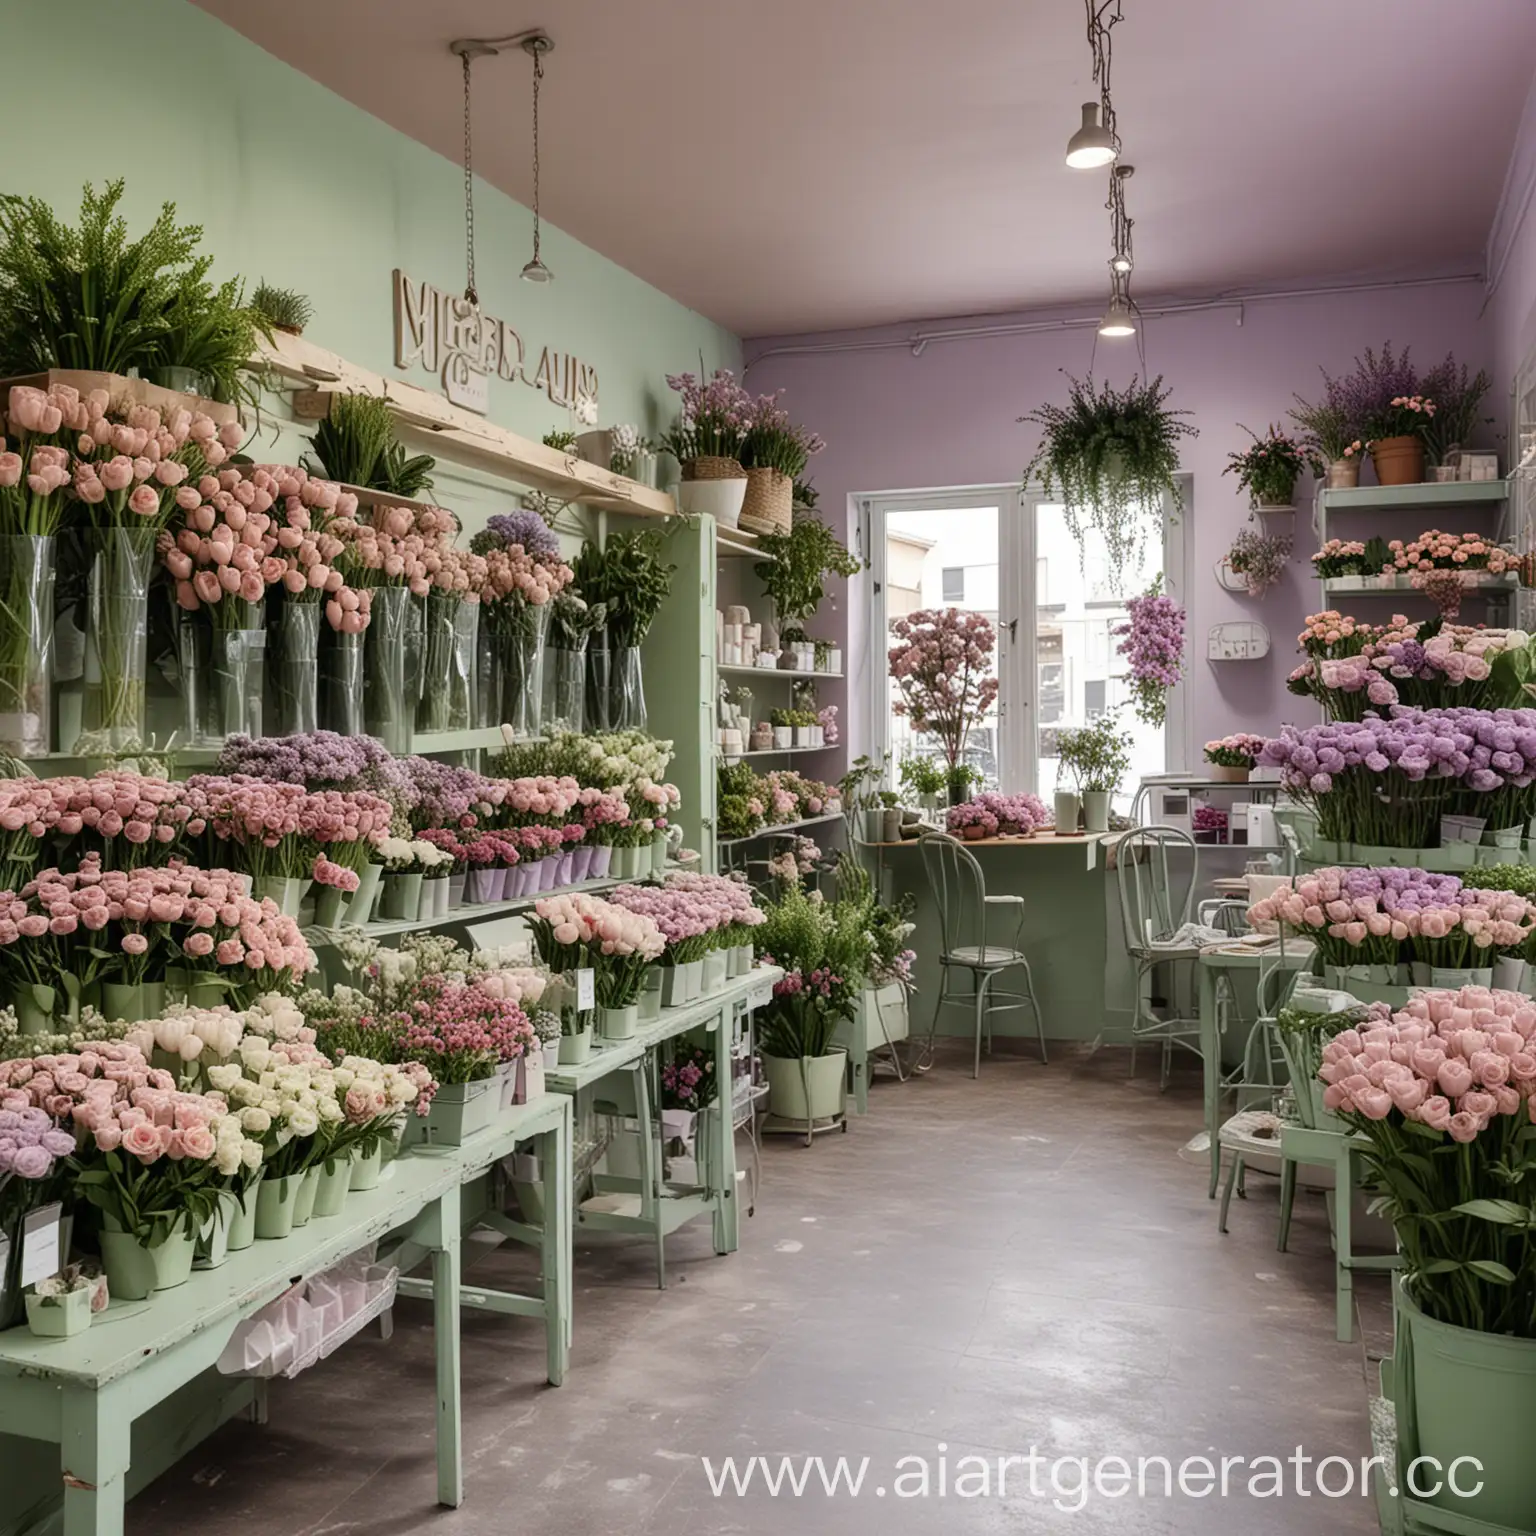 Tender-Shades-of-Green-and-Light-Purple-Colors-Fill-Interior-of-Flower-Shop